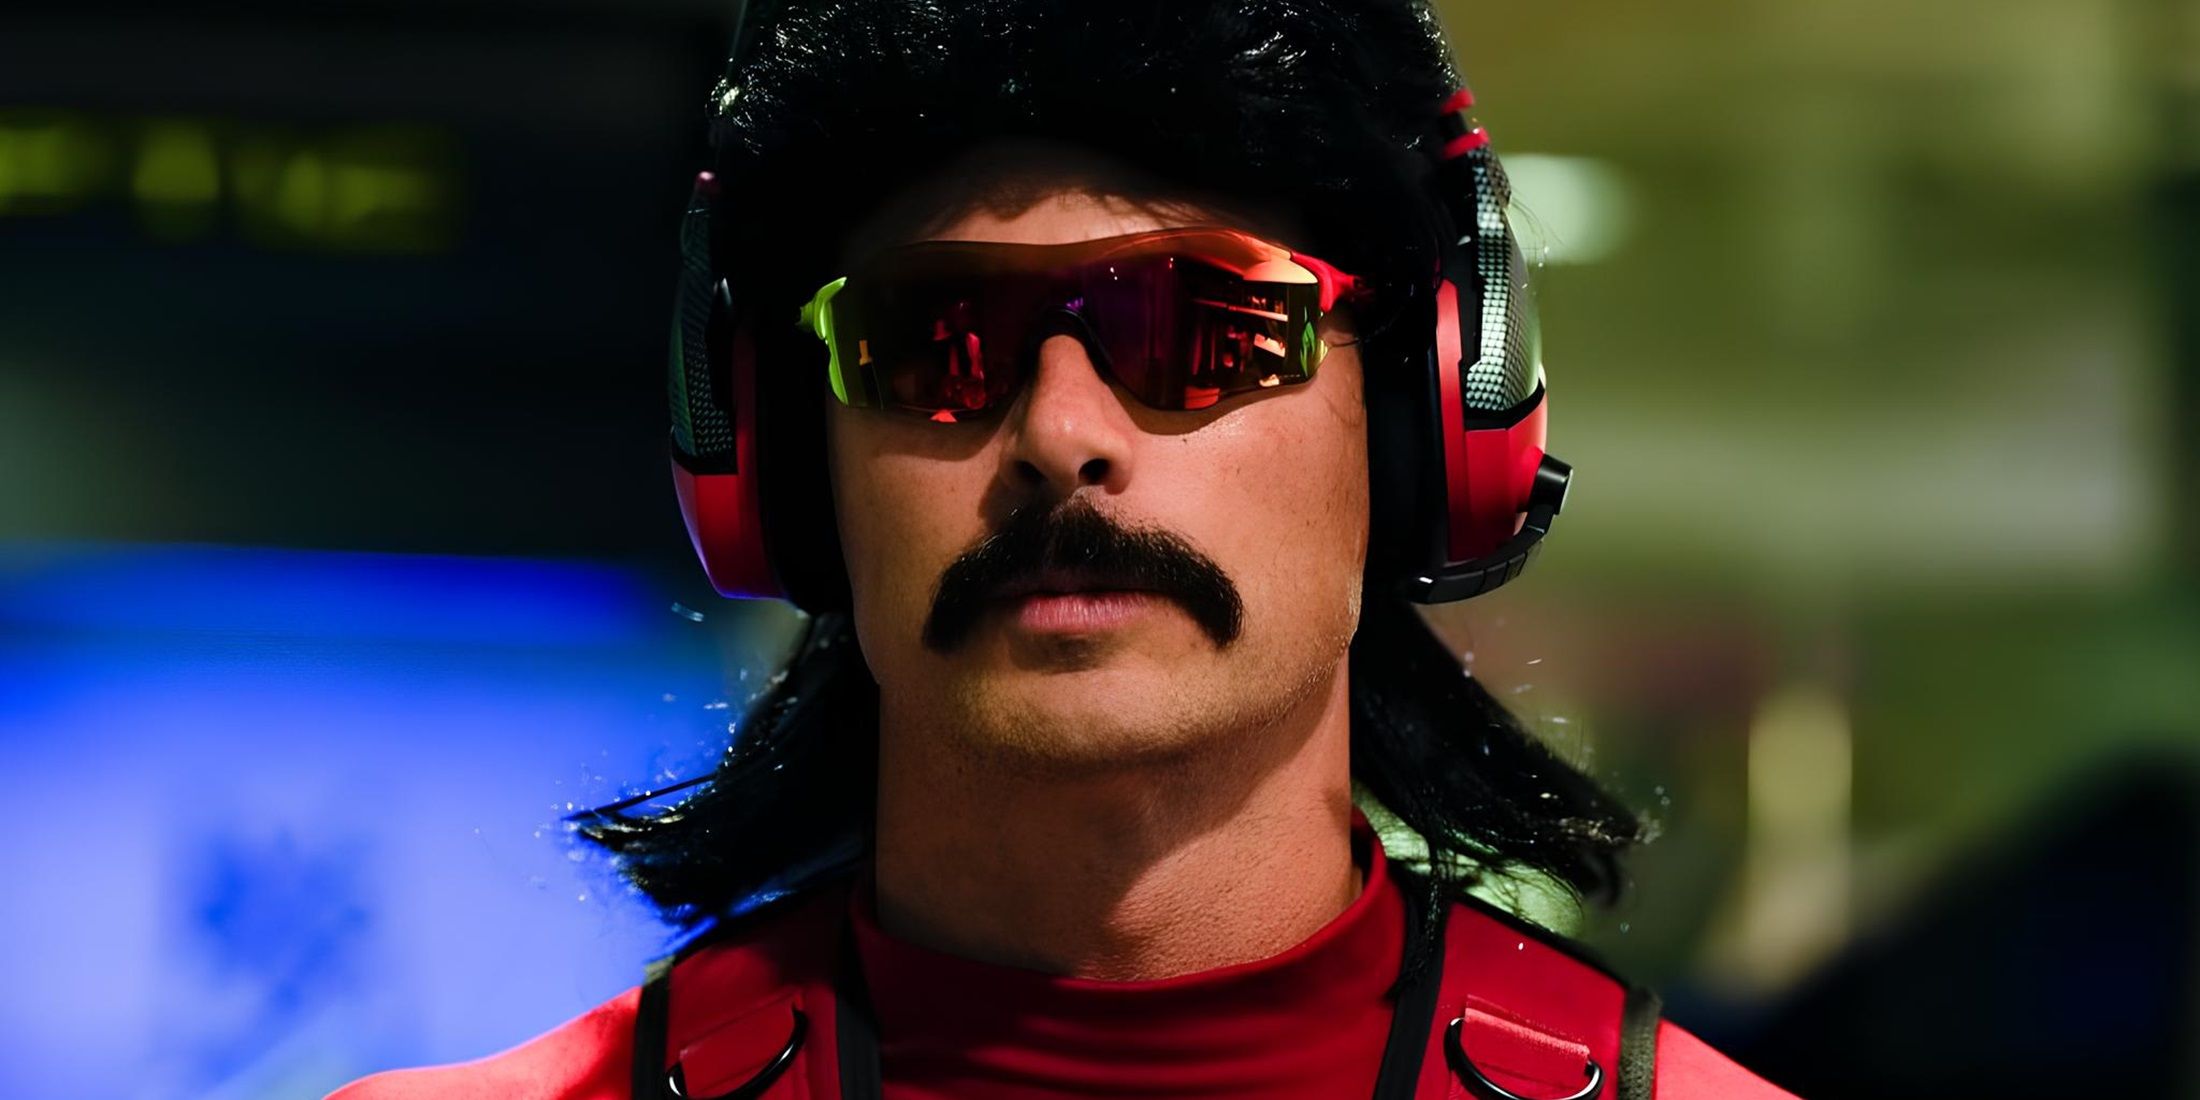 turtle-beach-is-ending-its-partnership-with-dr-disrespect